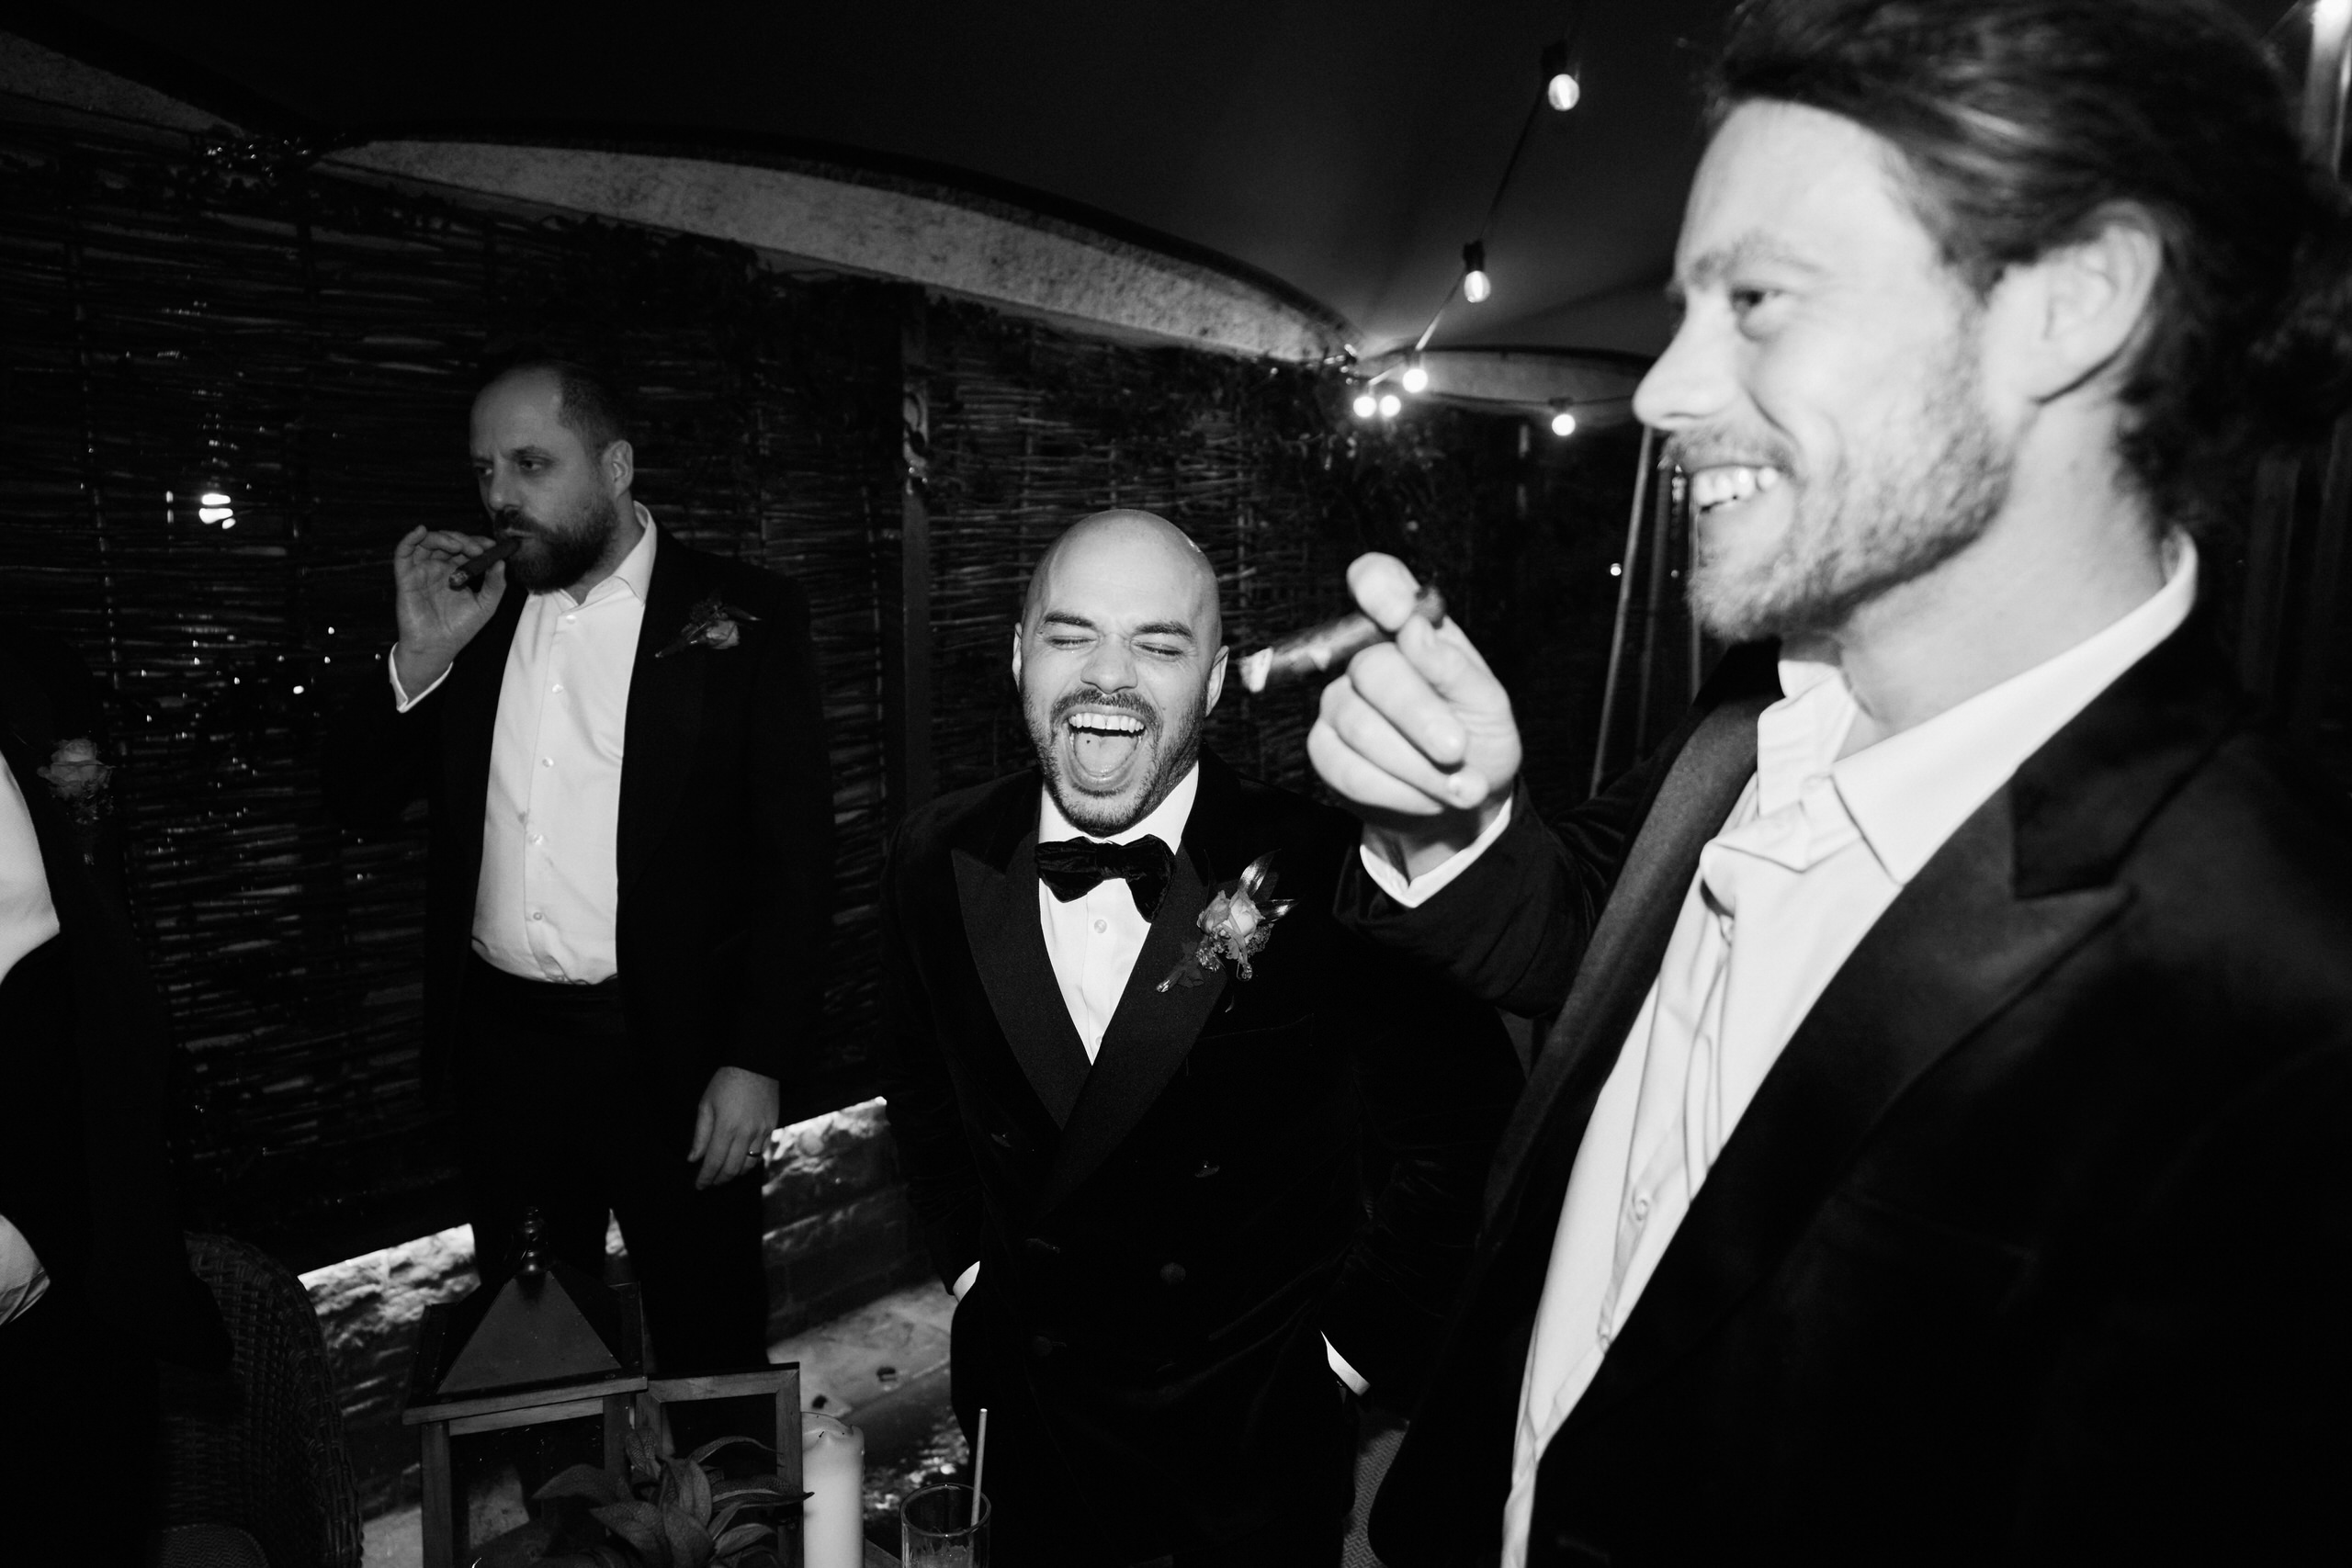 A picture in black and white of guys in suits laughing.